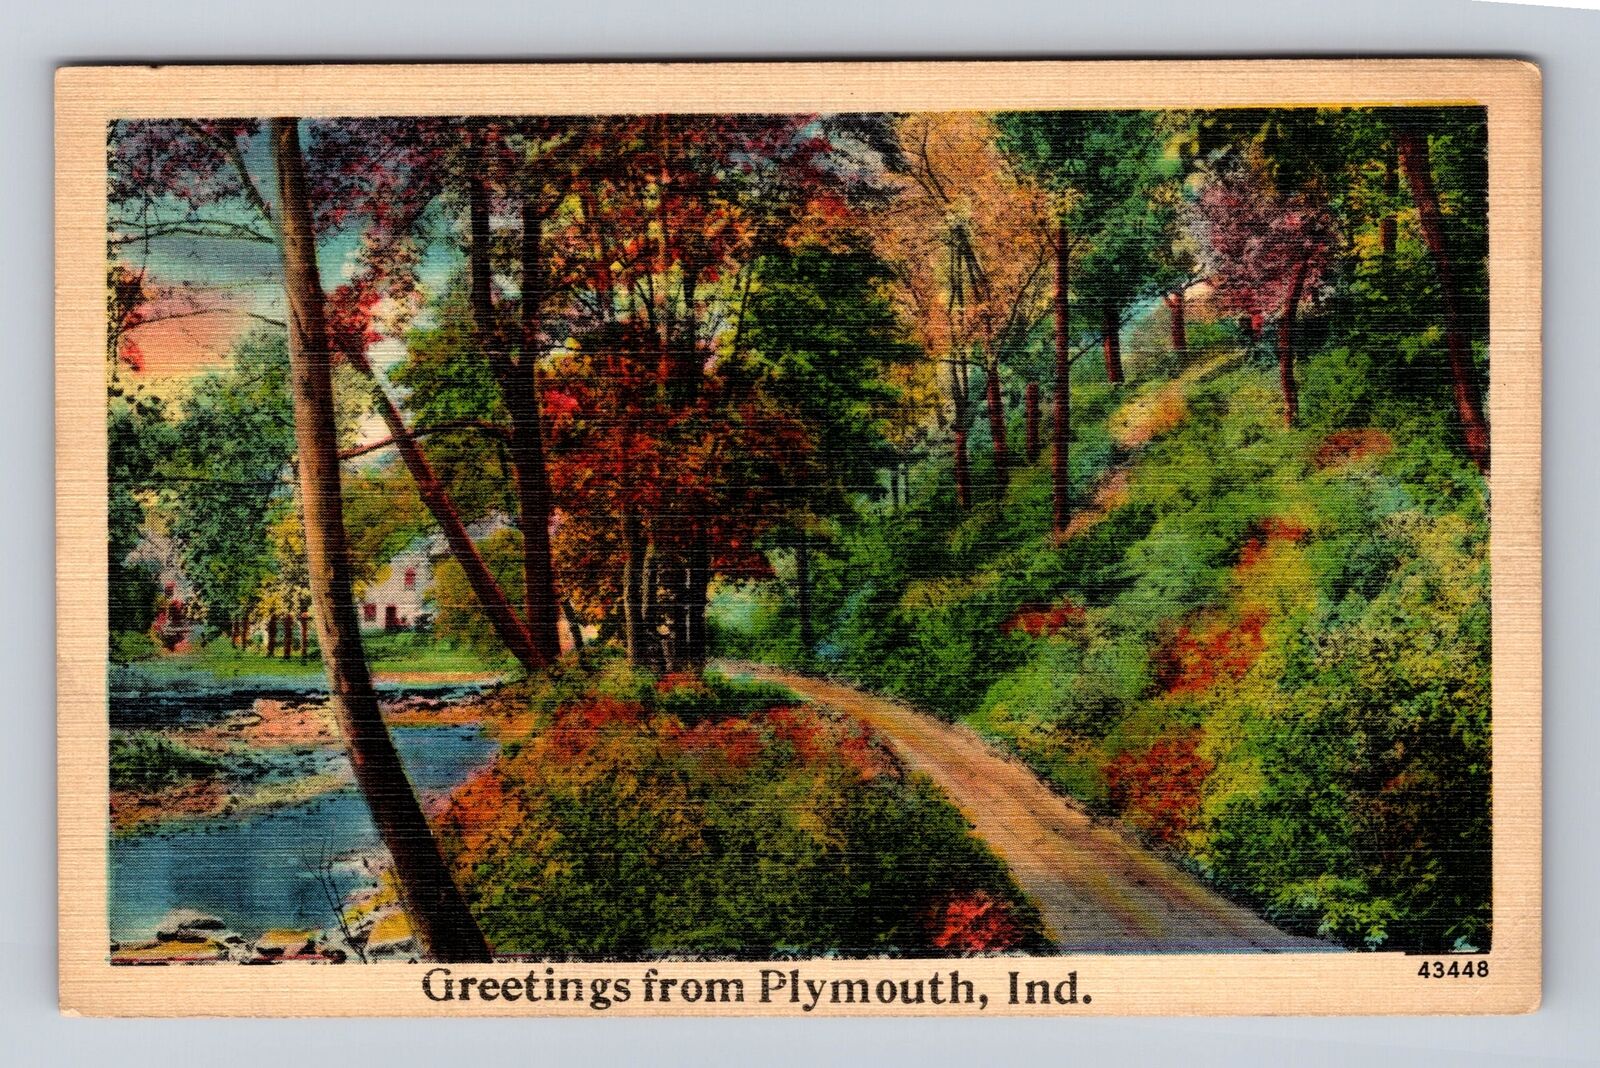 Plymouth IN-Indiana, Greetings Scenic Autumn Roadway View Vintage c1939 Postcard